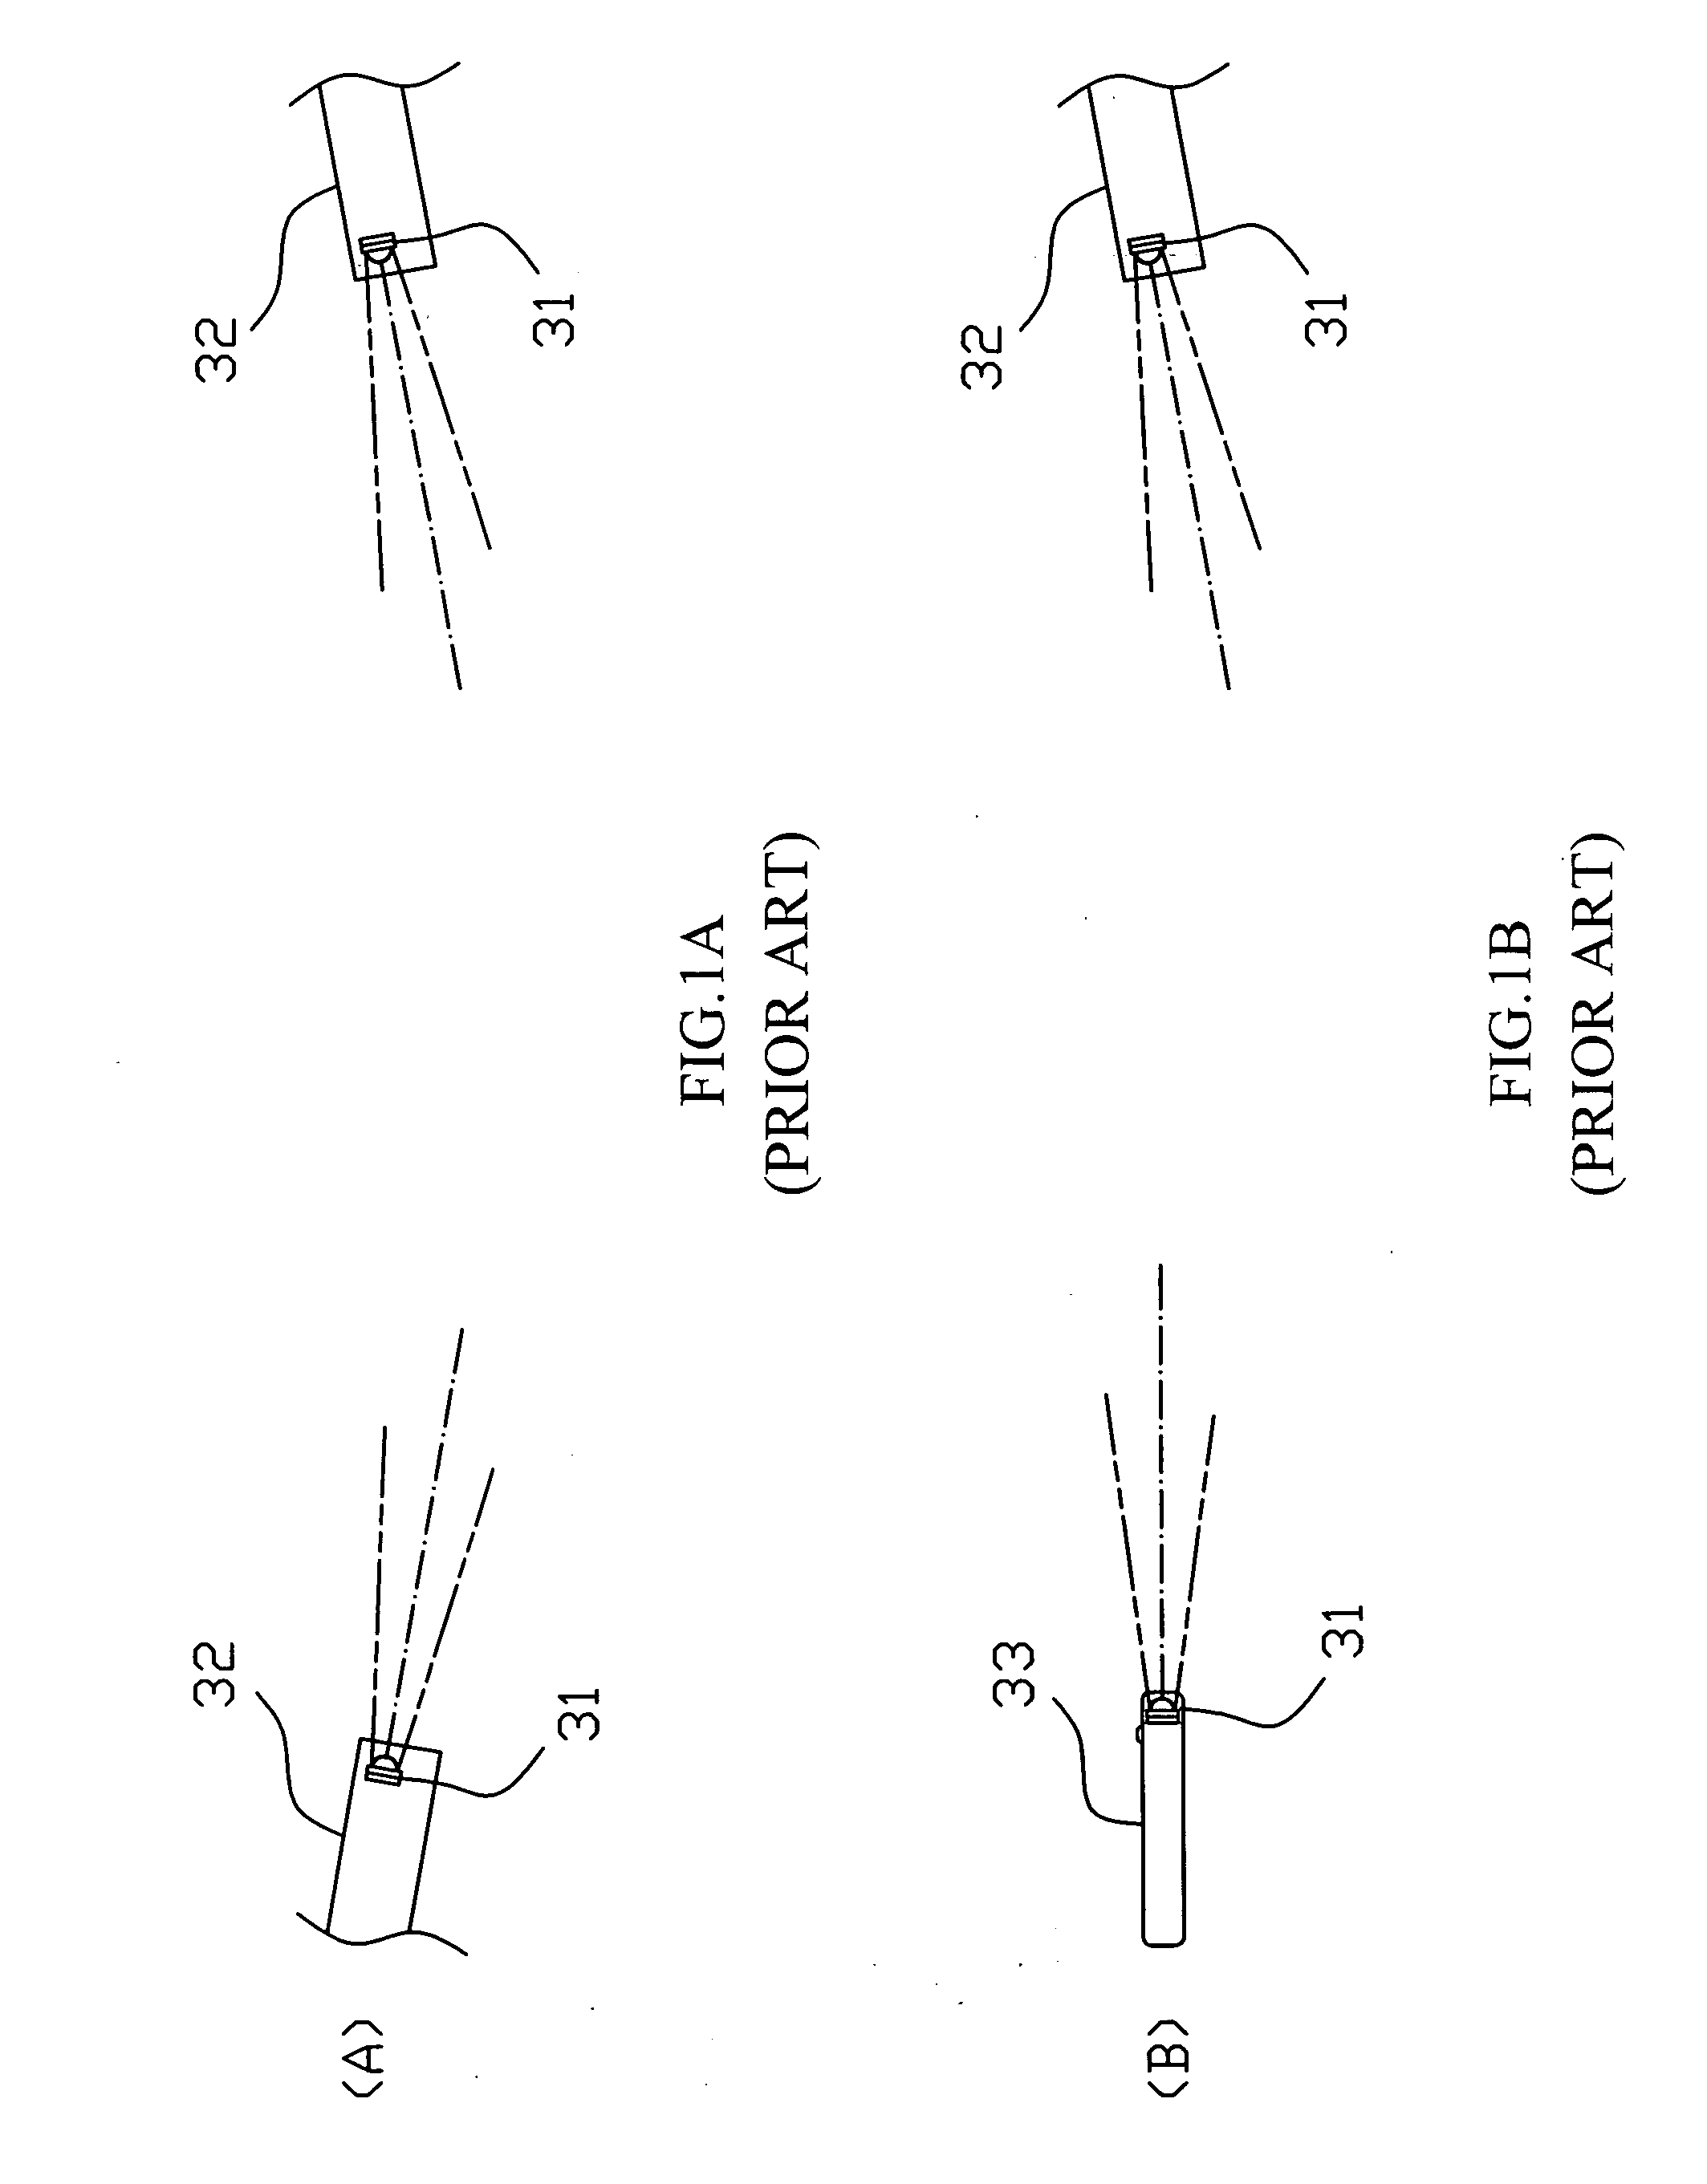 Infrated transceiver module that can adjust its transmitting and receiving angle automatically